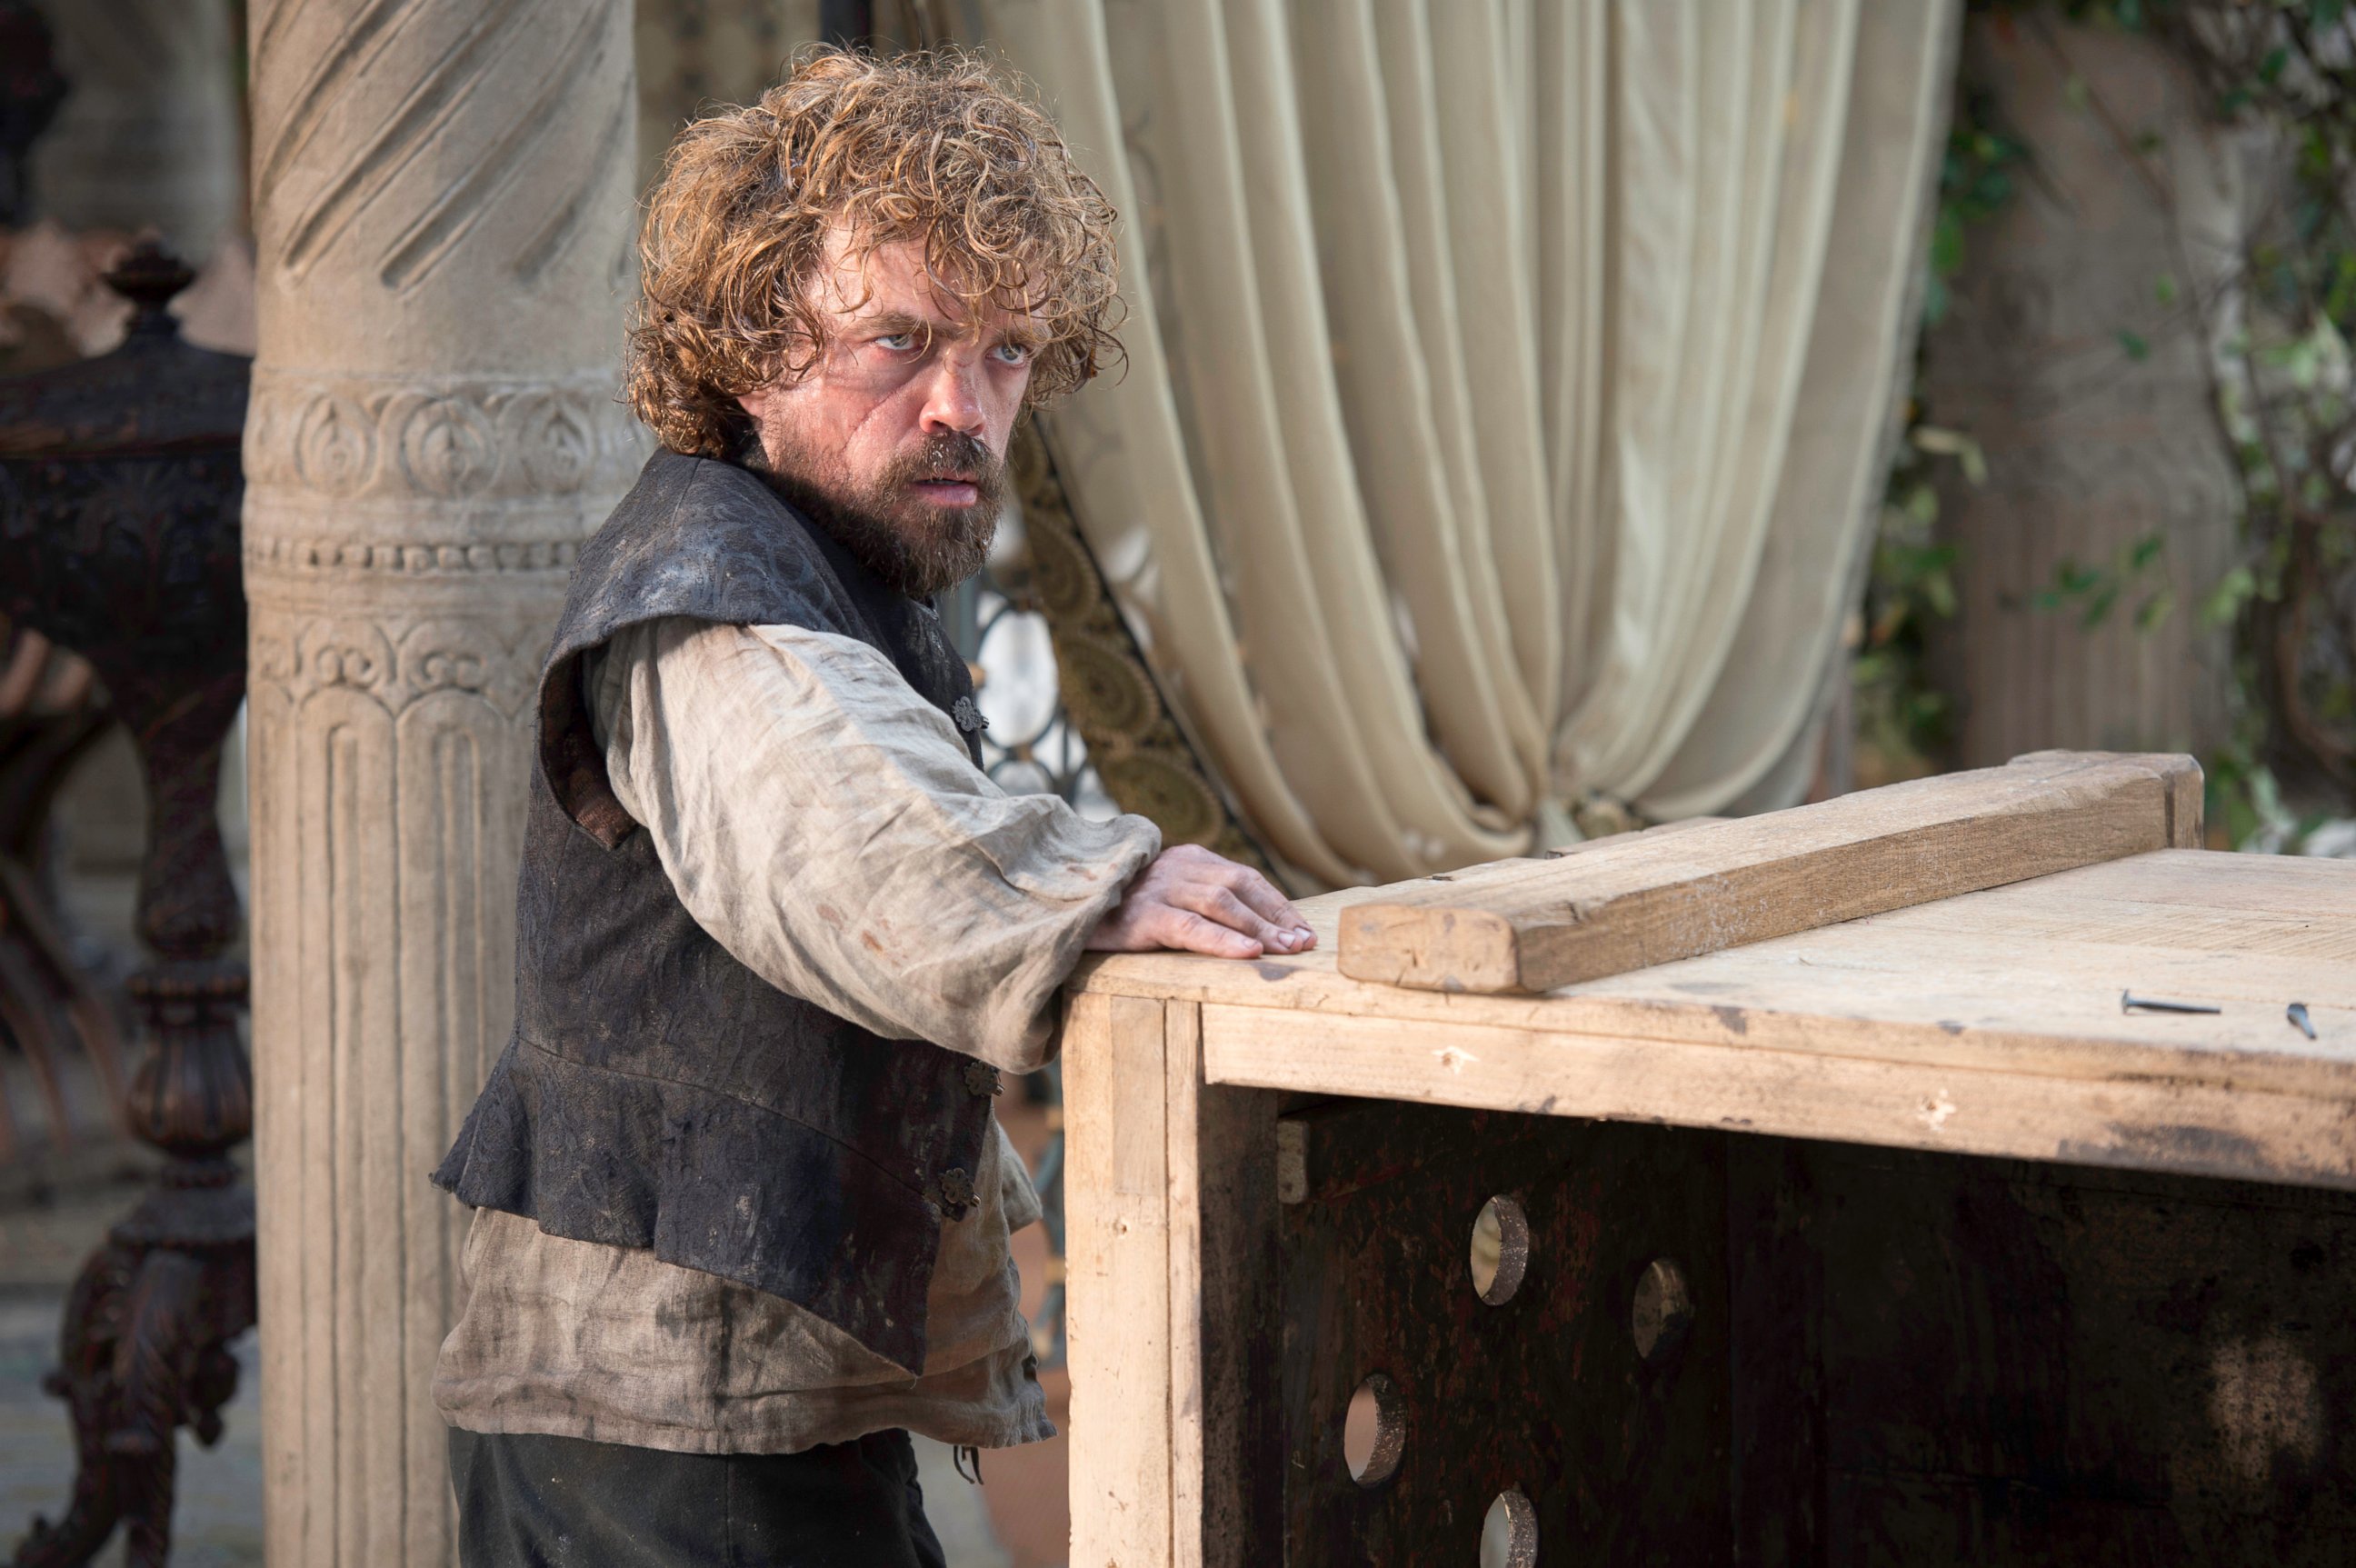 PHOTO: Peter Dinklage as Tyrion Lannister in a scene from season five of "Game of Thrones."